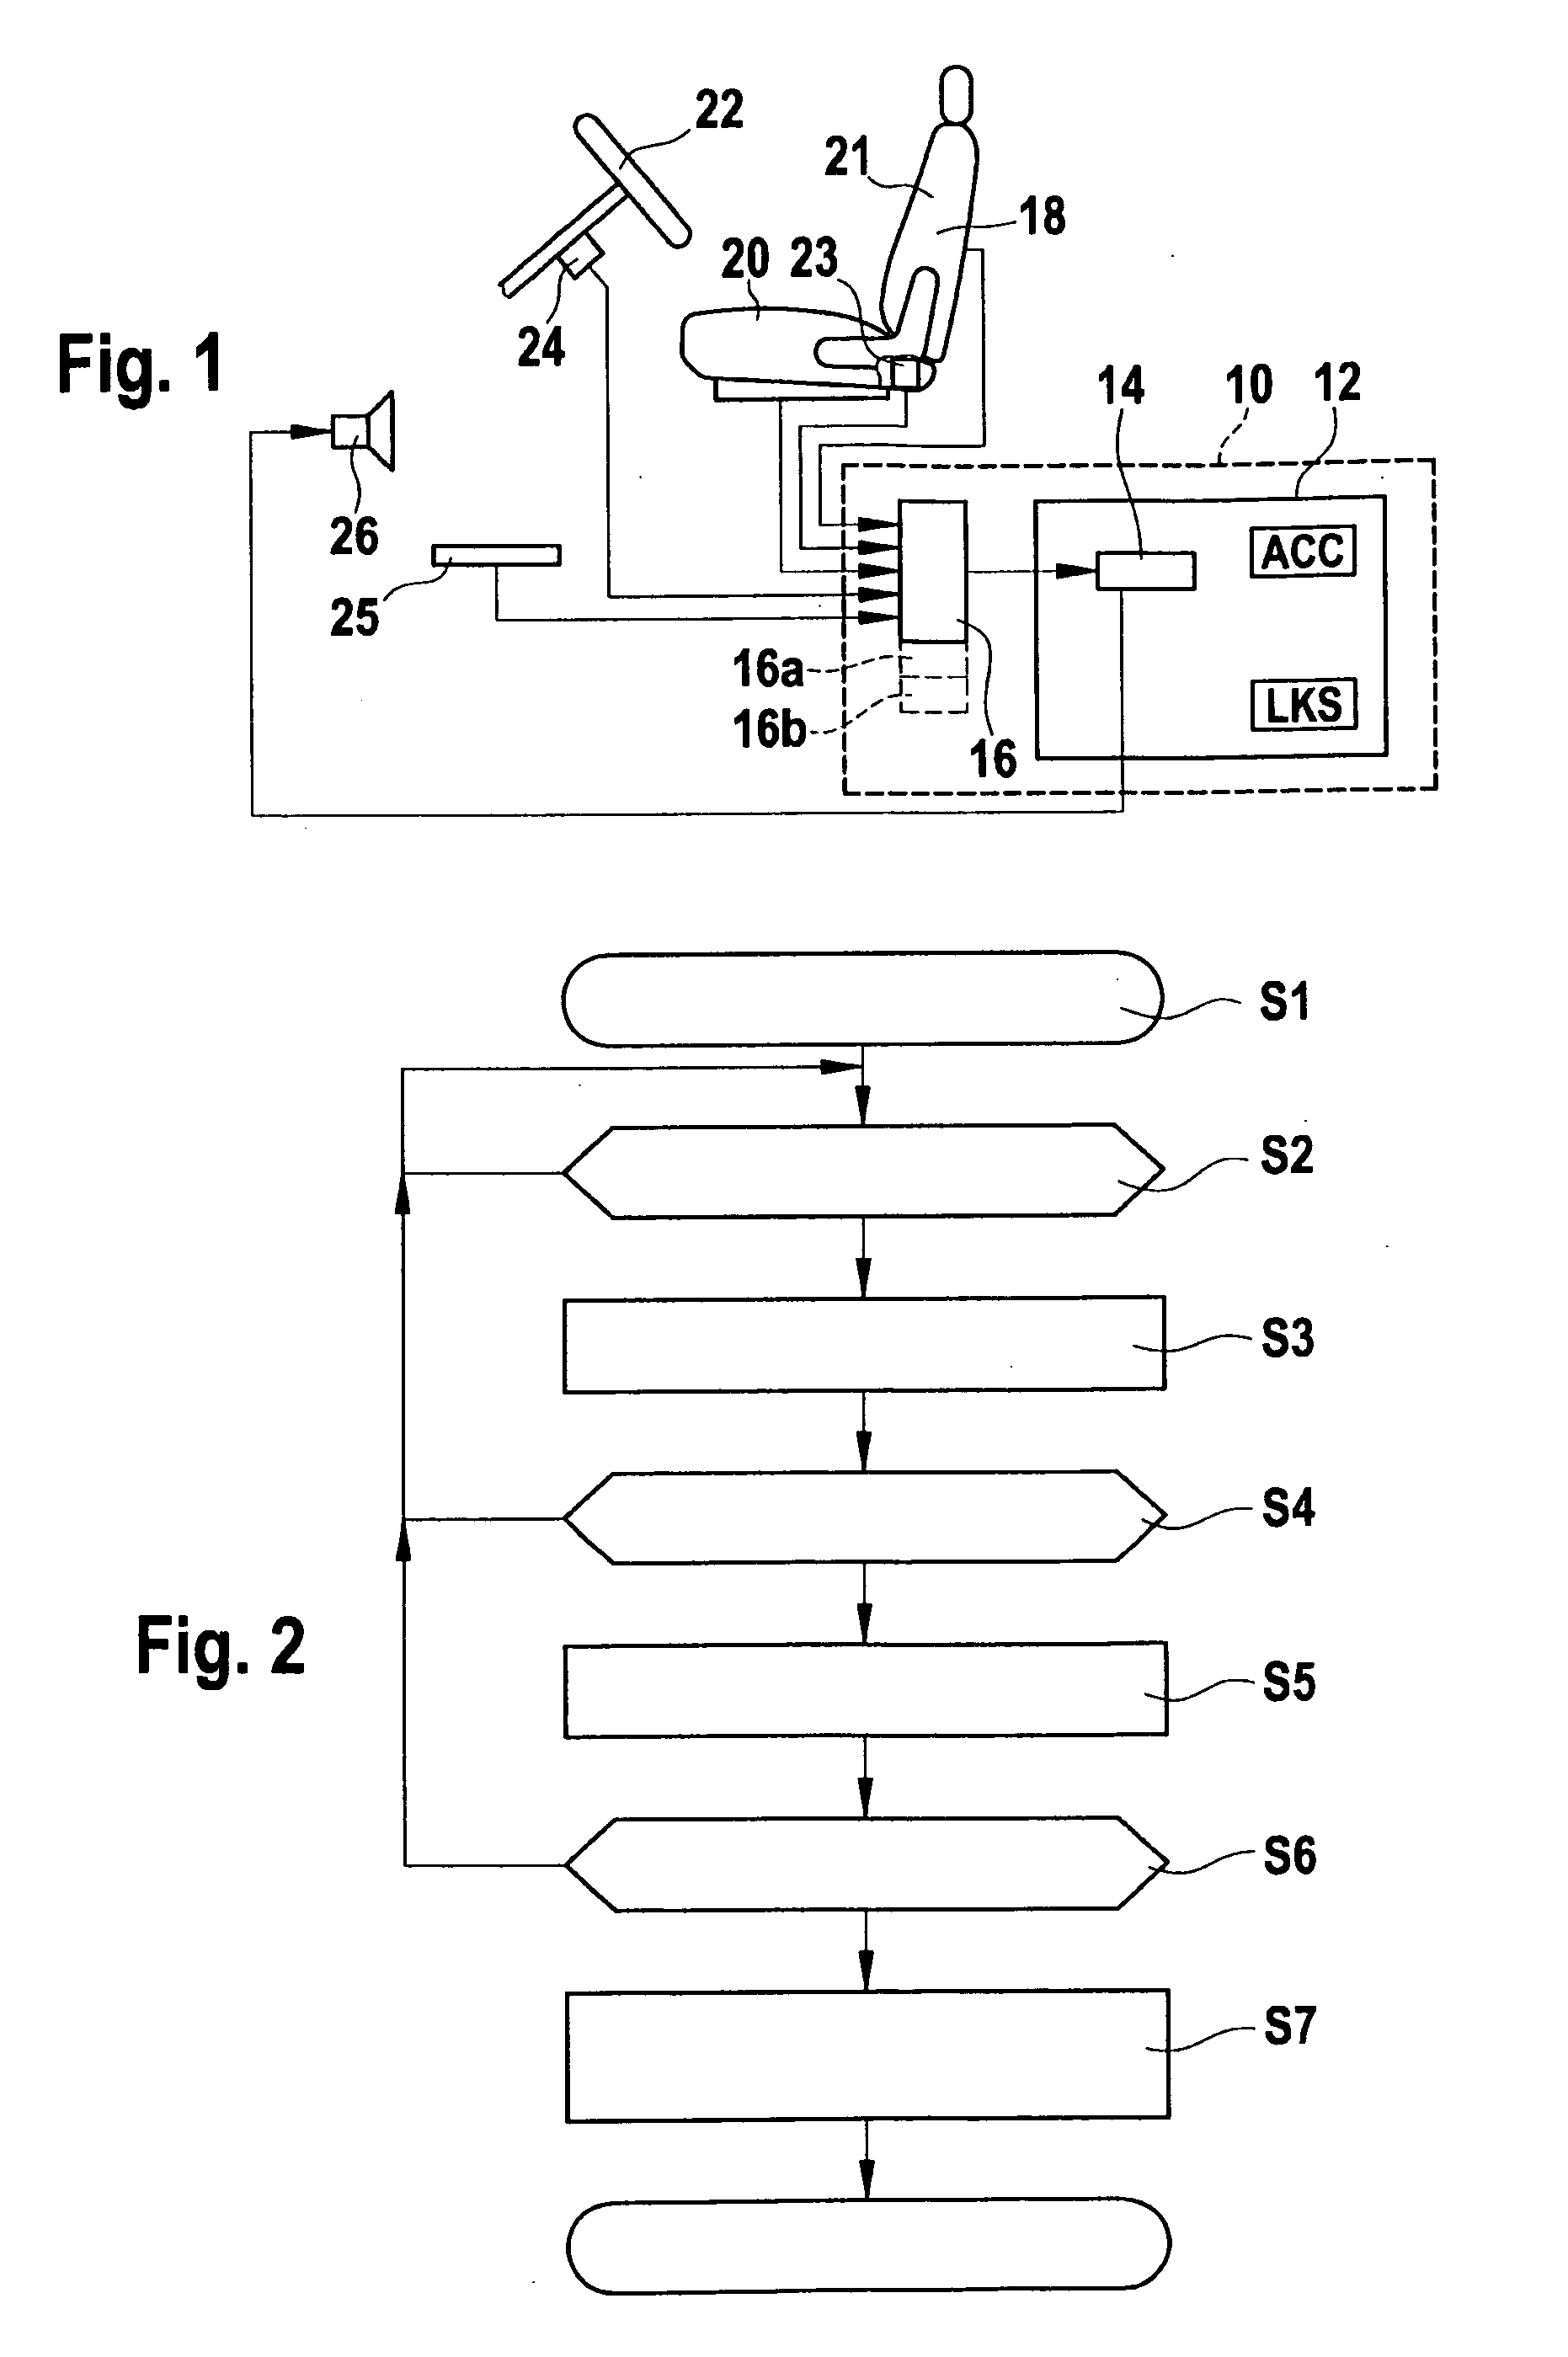 Driving assistance system having presence monitoring